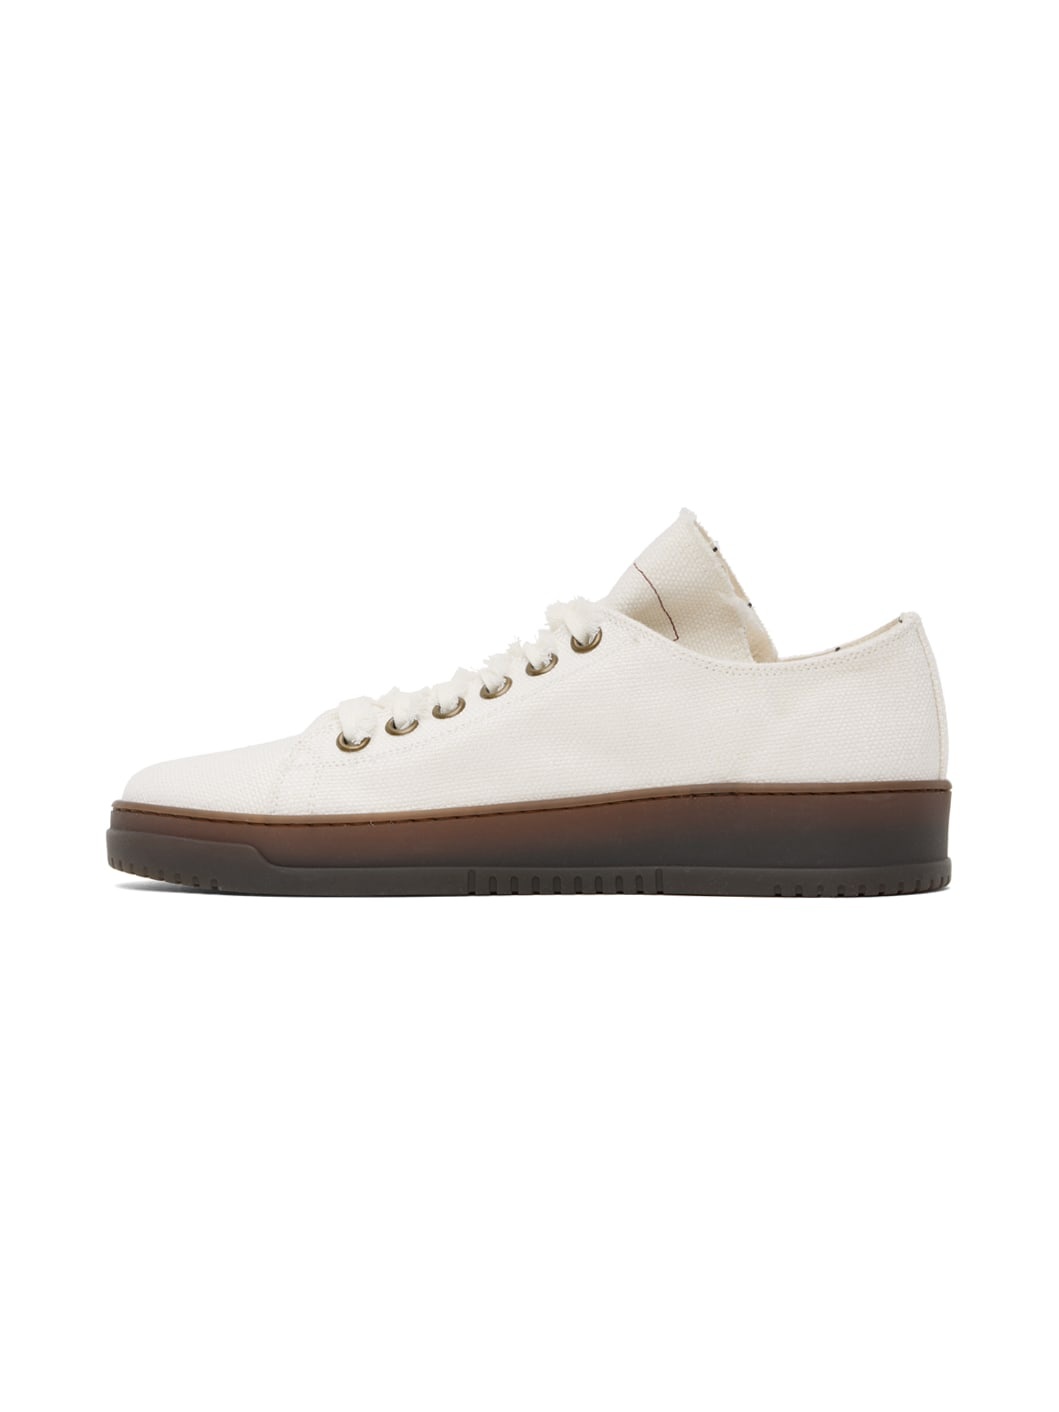 Off-White Tennis Sneakers - 3